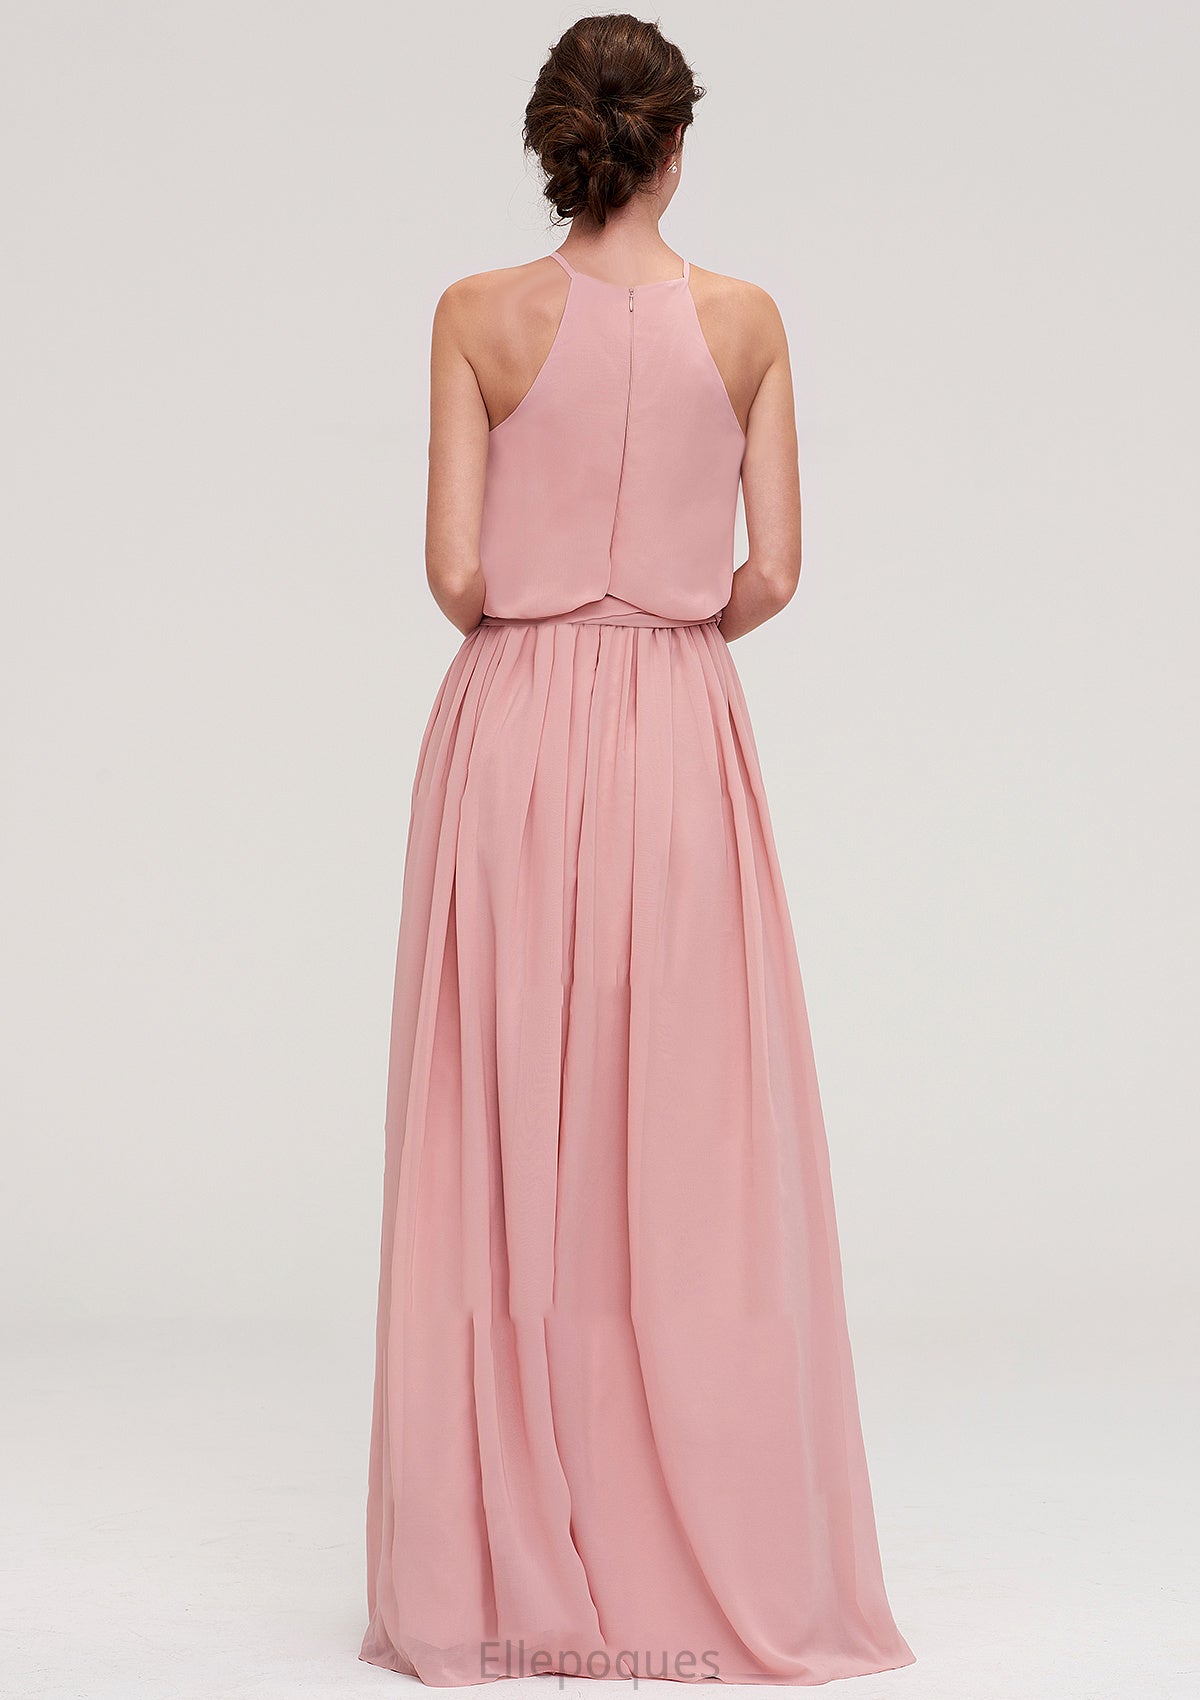 Sleeveless Scoop Neck A-line/Princess Chiffon Long/Floor-Length Bridesmaid Dresseses With Pleated Sashes Maleah HOP0025476